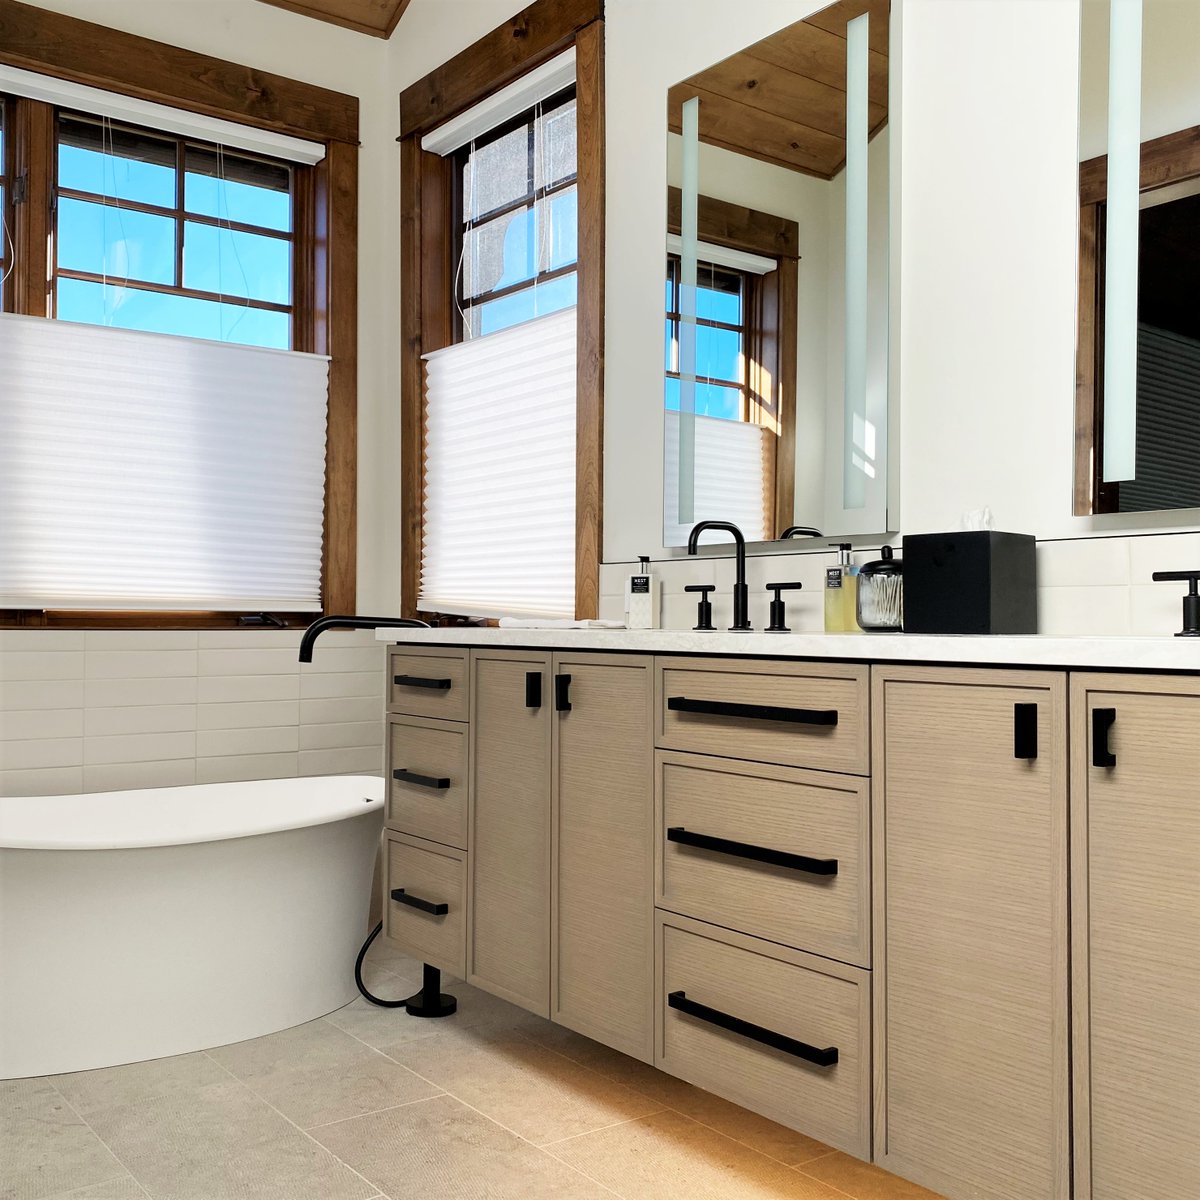 “The old skin has to be shed before the new one can come.” - Joseph Campbell. Remodeling wisdom!
.
.
.
#remodeling #renovation #customcabinetry #custombathroom #bathroomdesign #interiordesign #moderndesign #cabinets #bathroomcabinets #bathroomvanity #freestandingtub